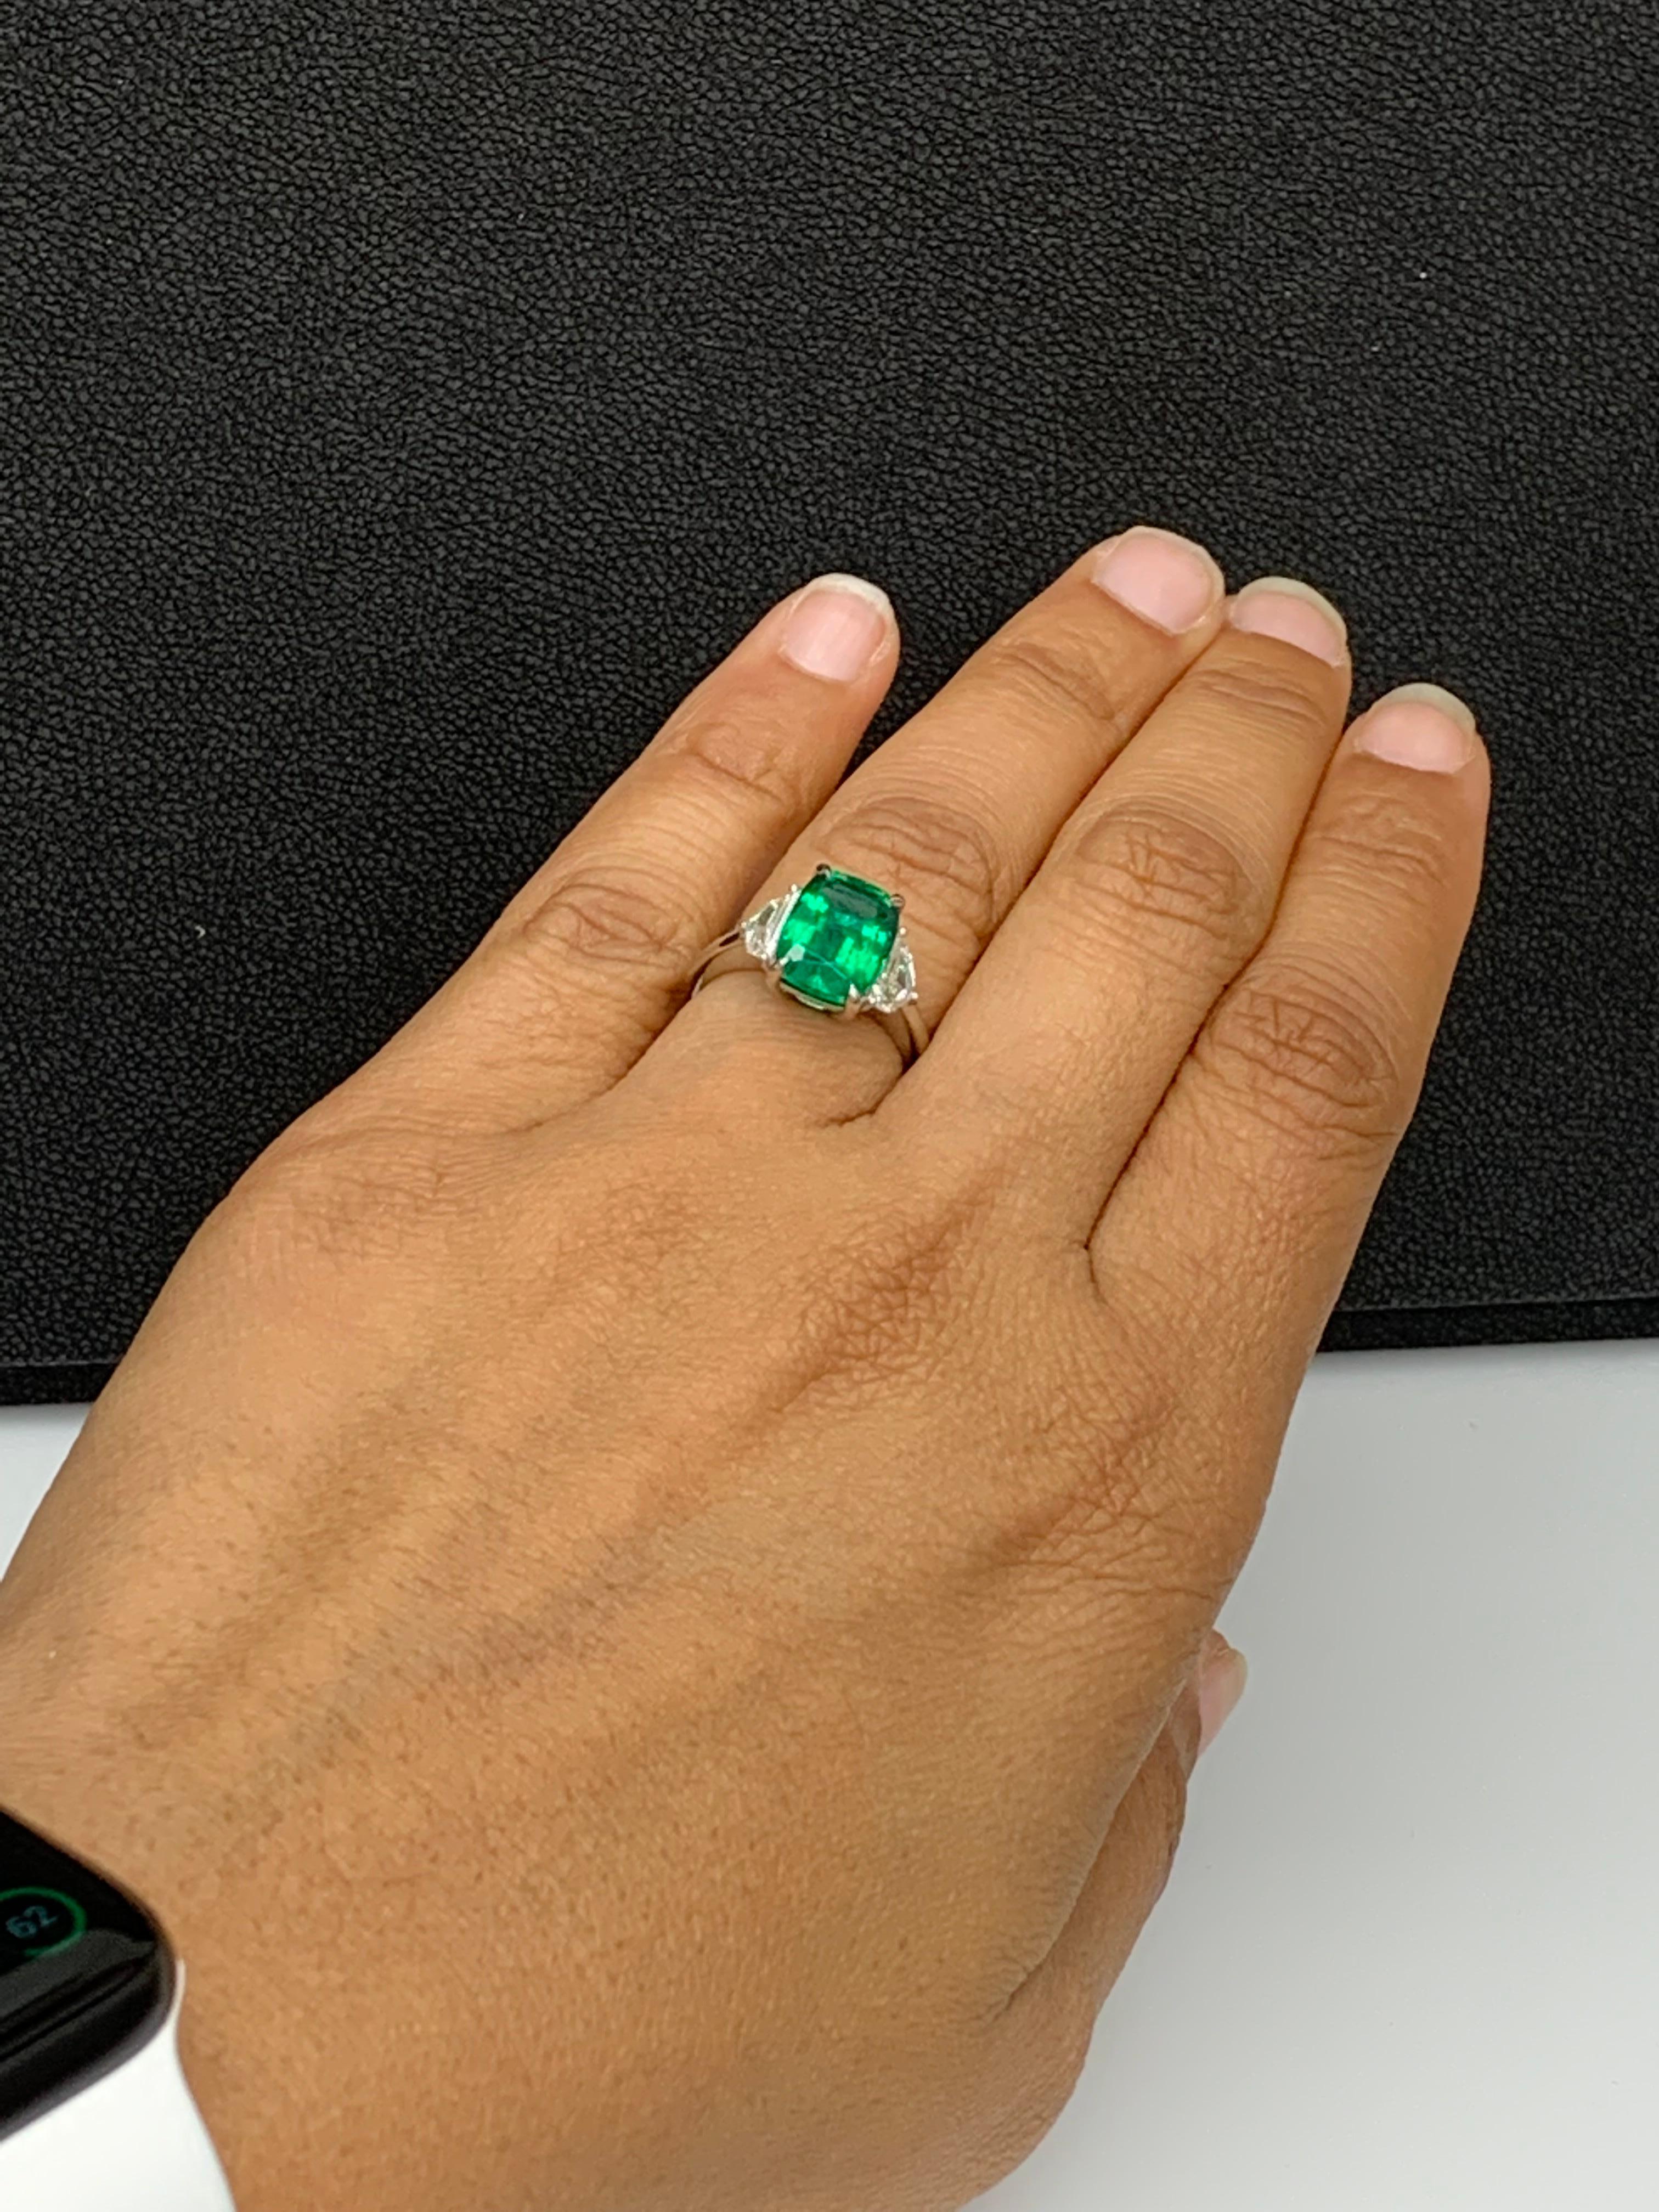 Certified 3.49 Carat Cushion Cut Emerald & Diamond Engagement Ring in Platinum For Sale 8